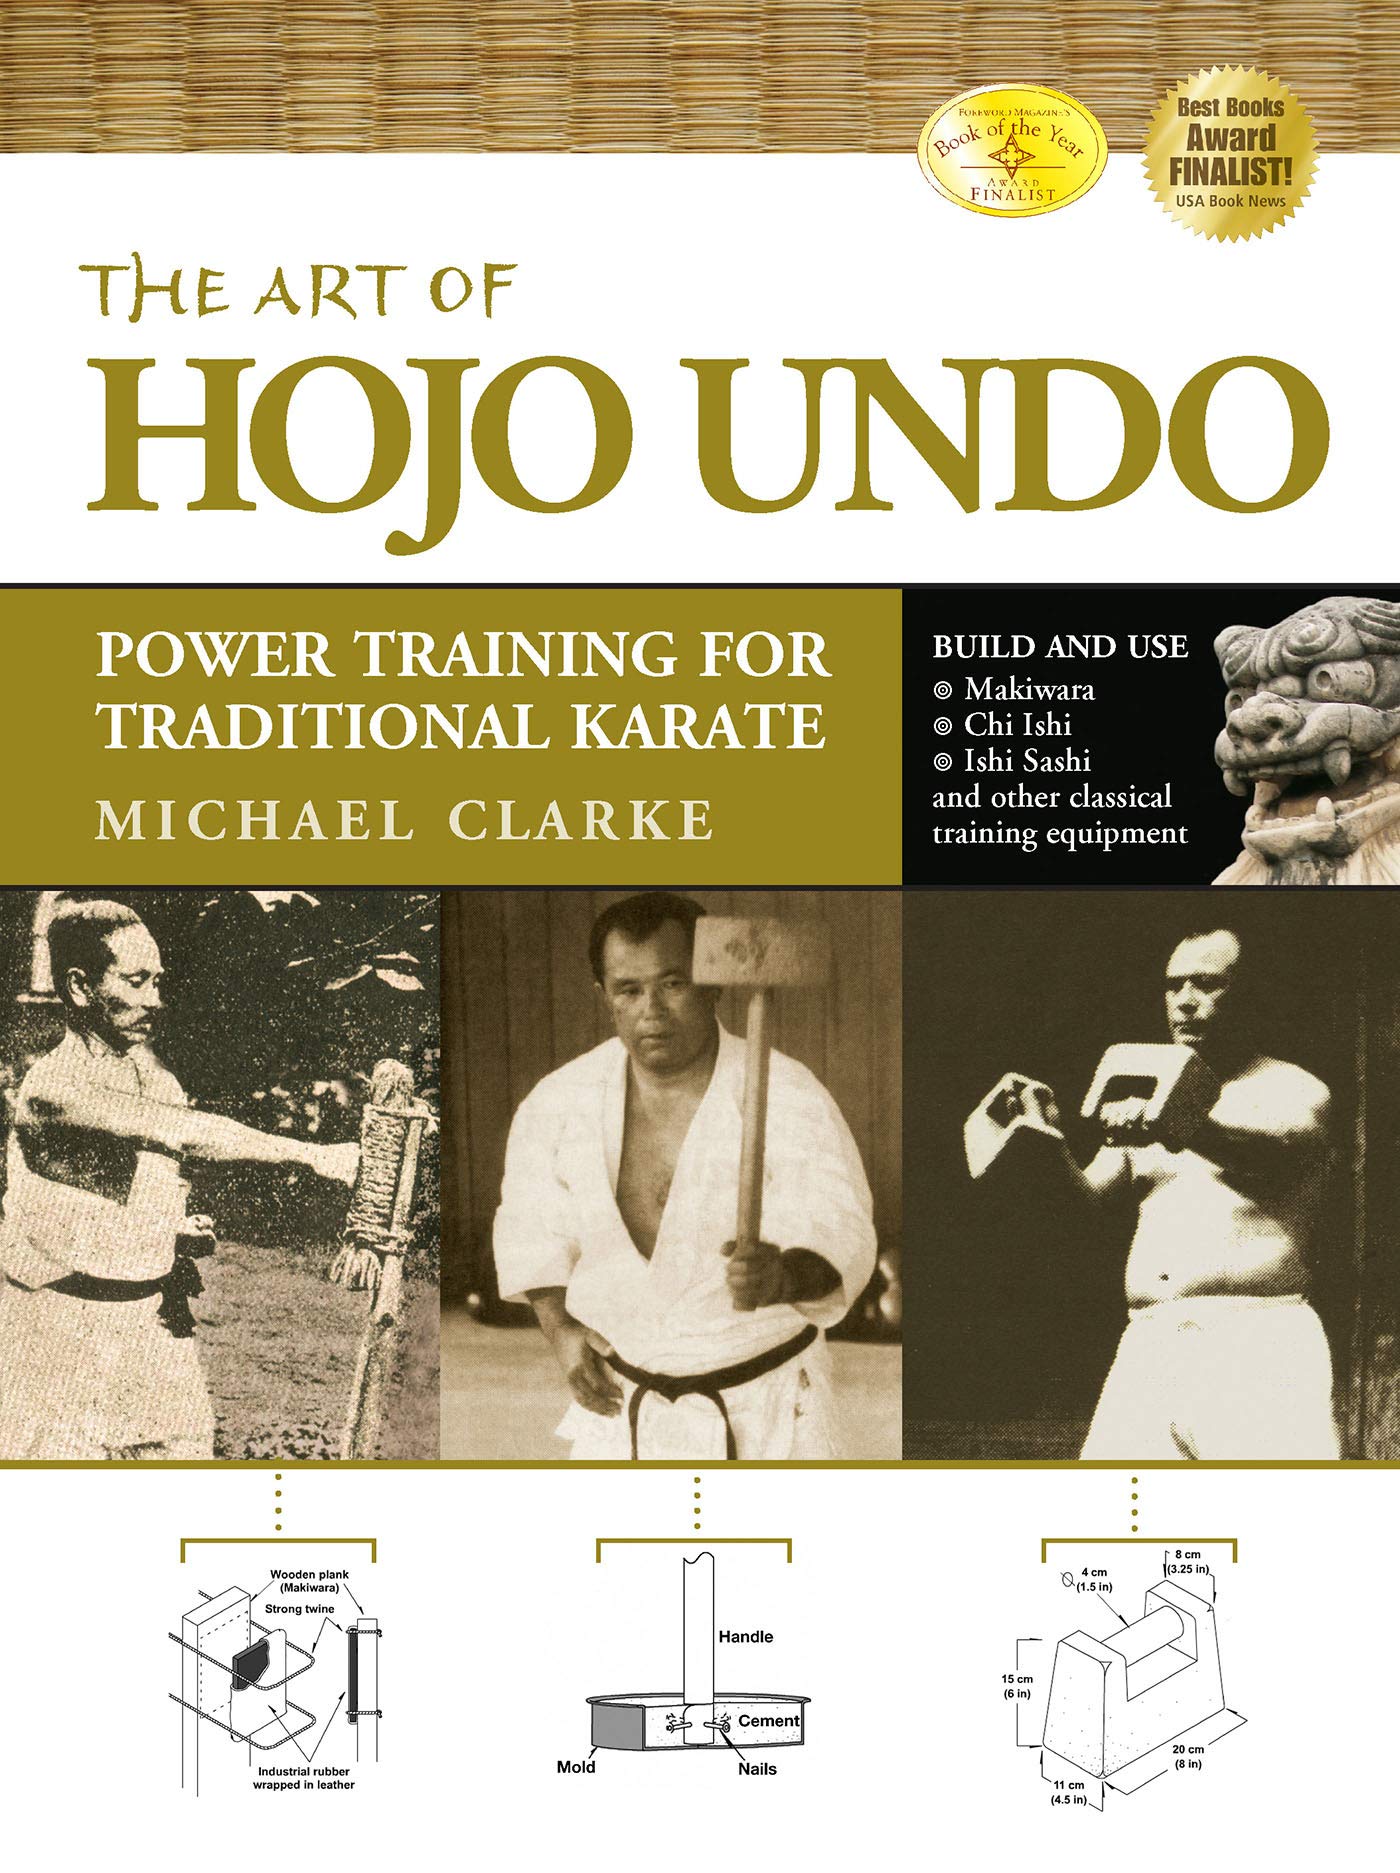 The Art of Hojo Undo: Power Training for Traditional Karate Book by Michael Clarke - Budovideos Inc